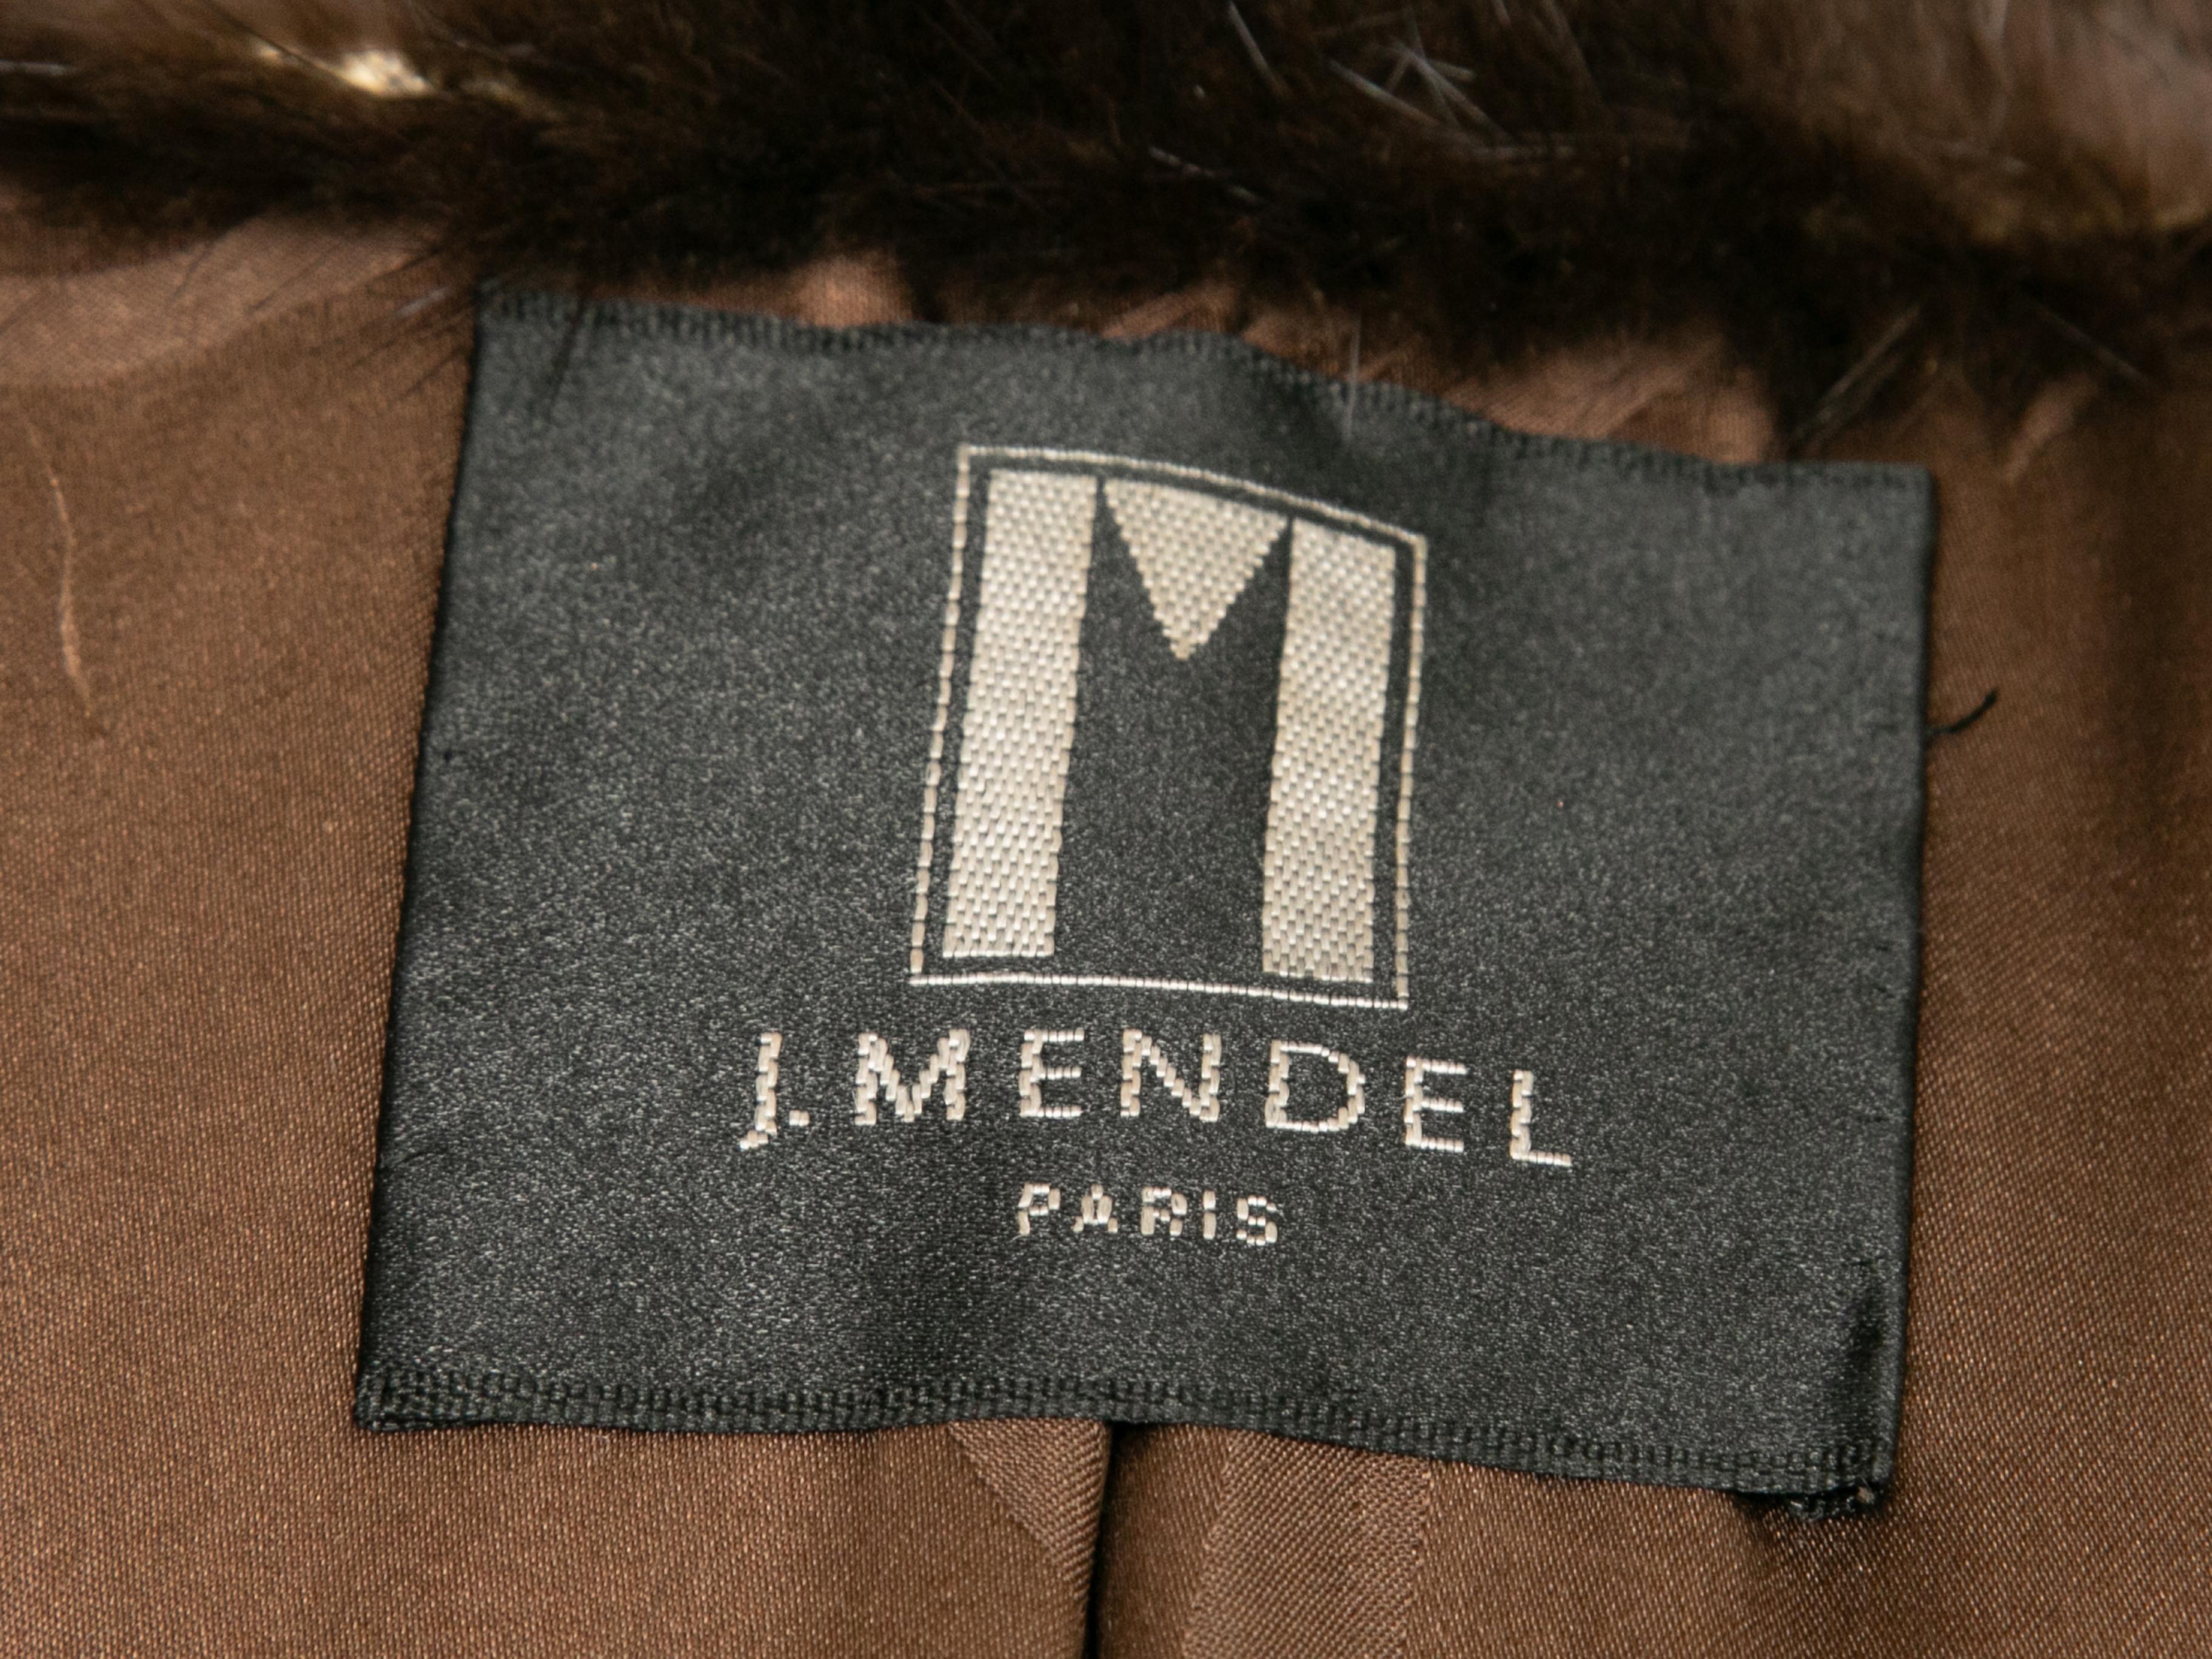 Brown long mink-trimmed coat by J.Mendel. Shawl collar. Dual hip pockets. Front button closures. 40